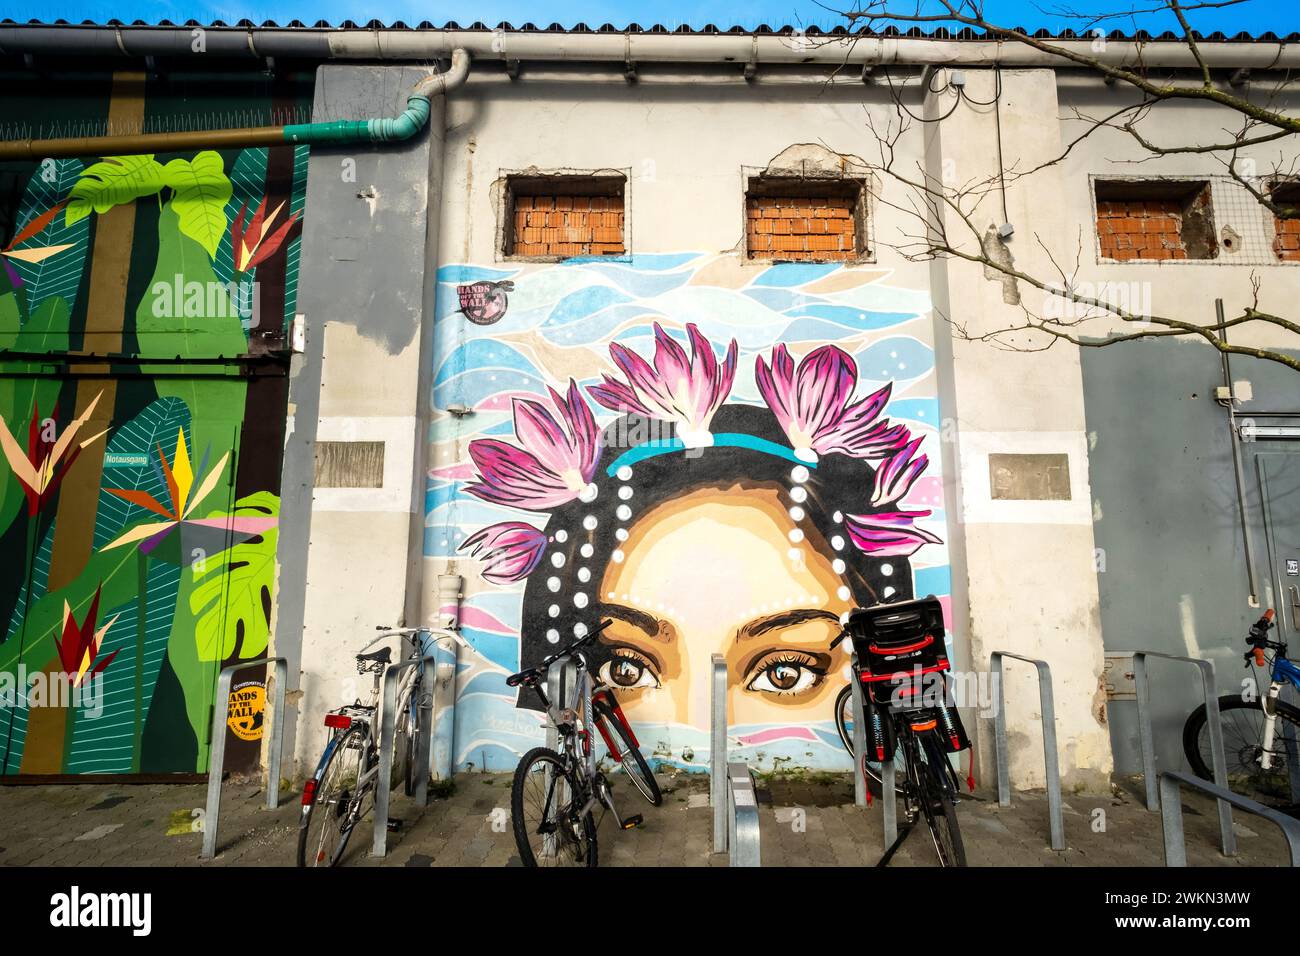 Bikes locked up next to a colorful mural of a woman in the Werksviertel neighborhood of Munich, Germany Stock Photo